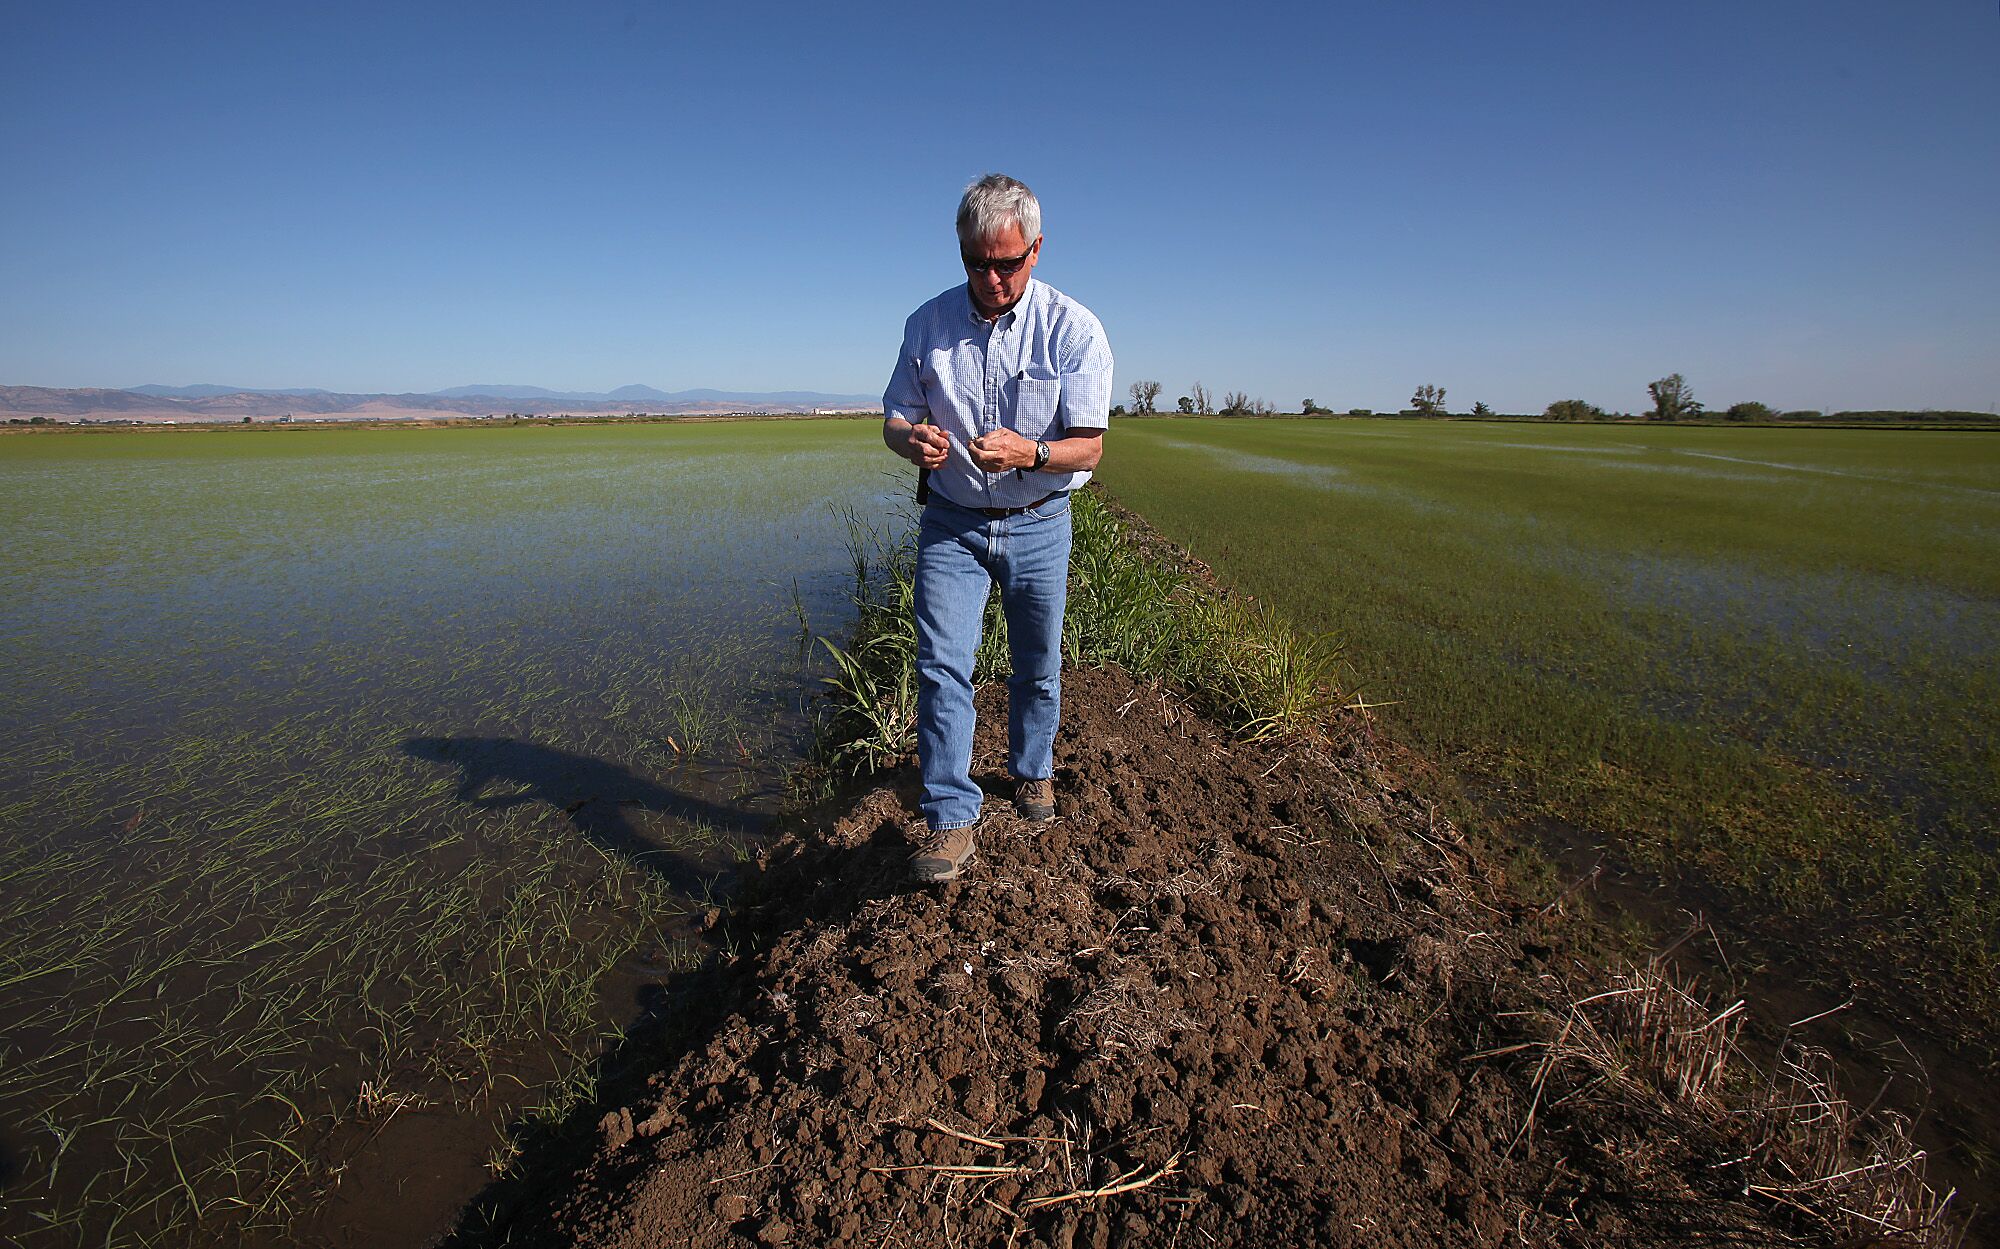 Rice grower Don Bransford stands in a field.